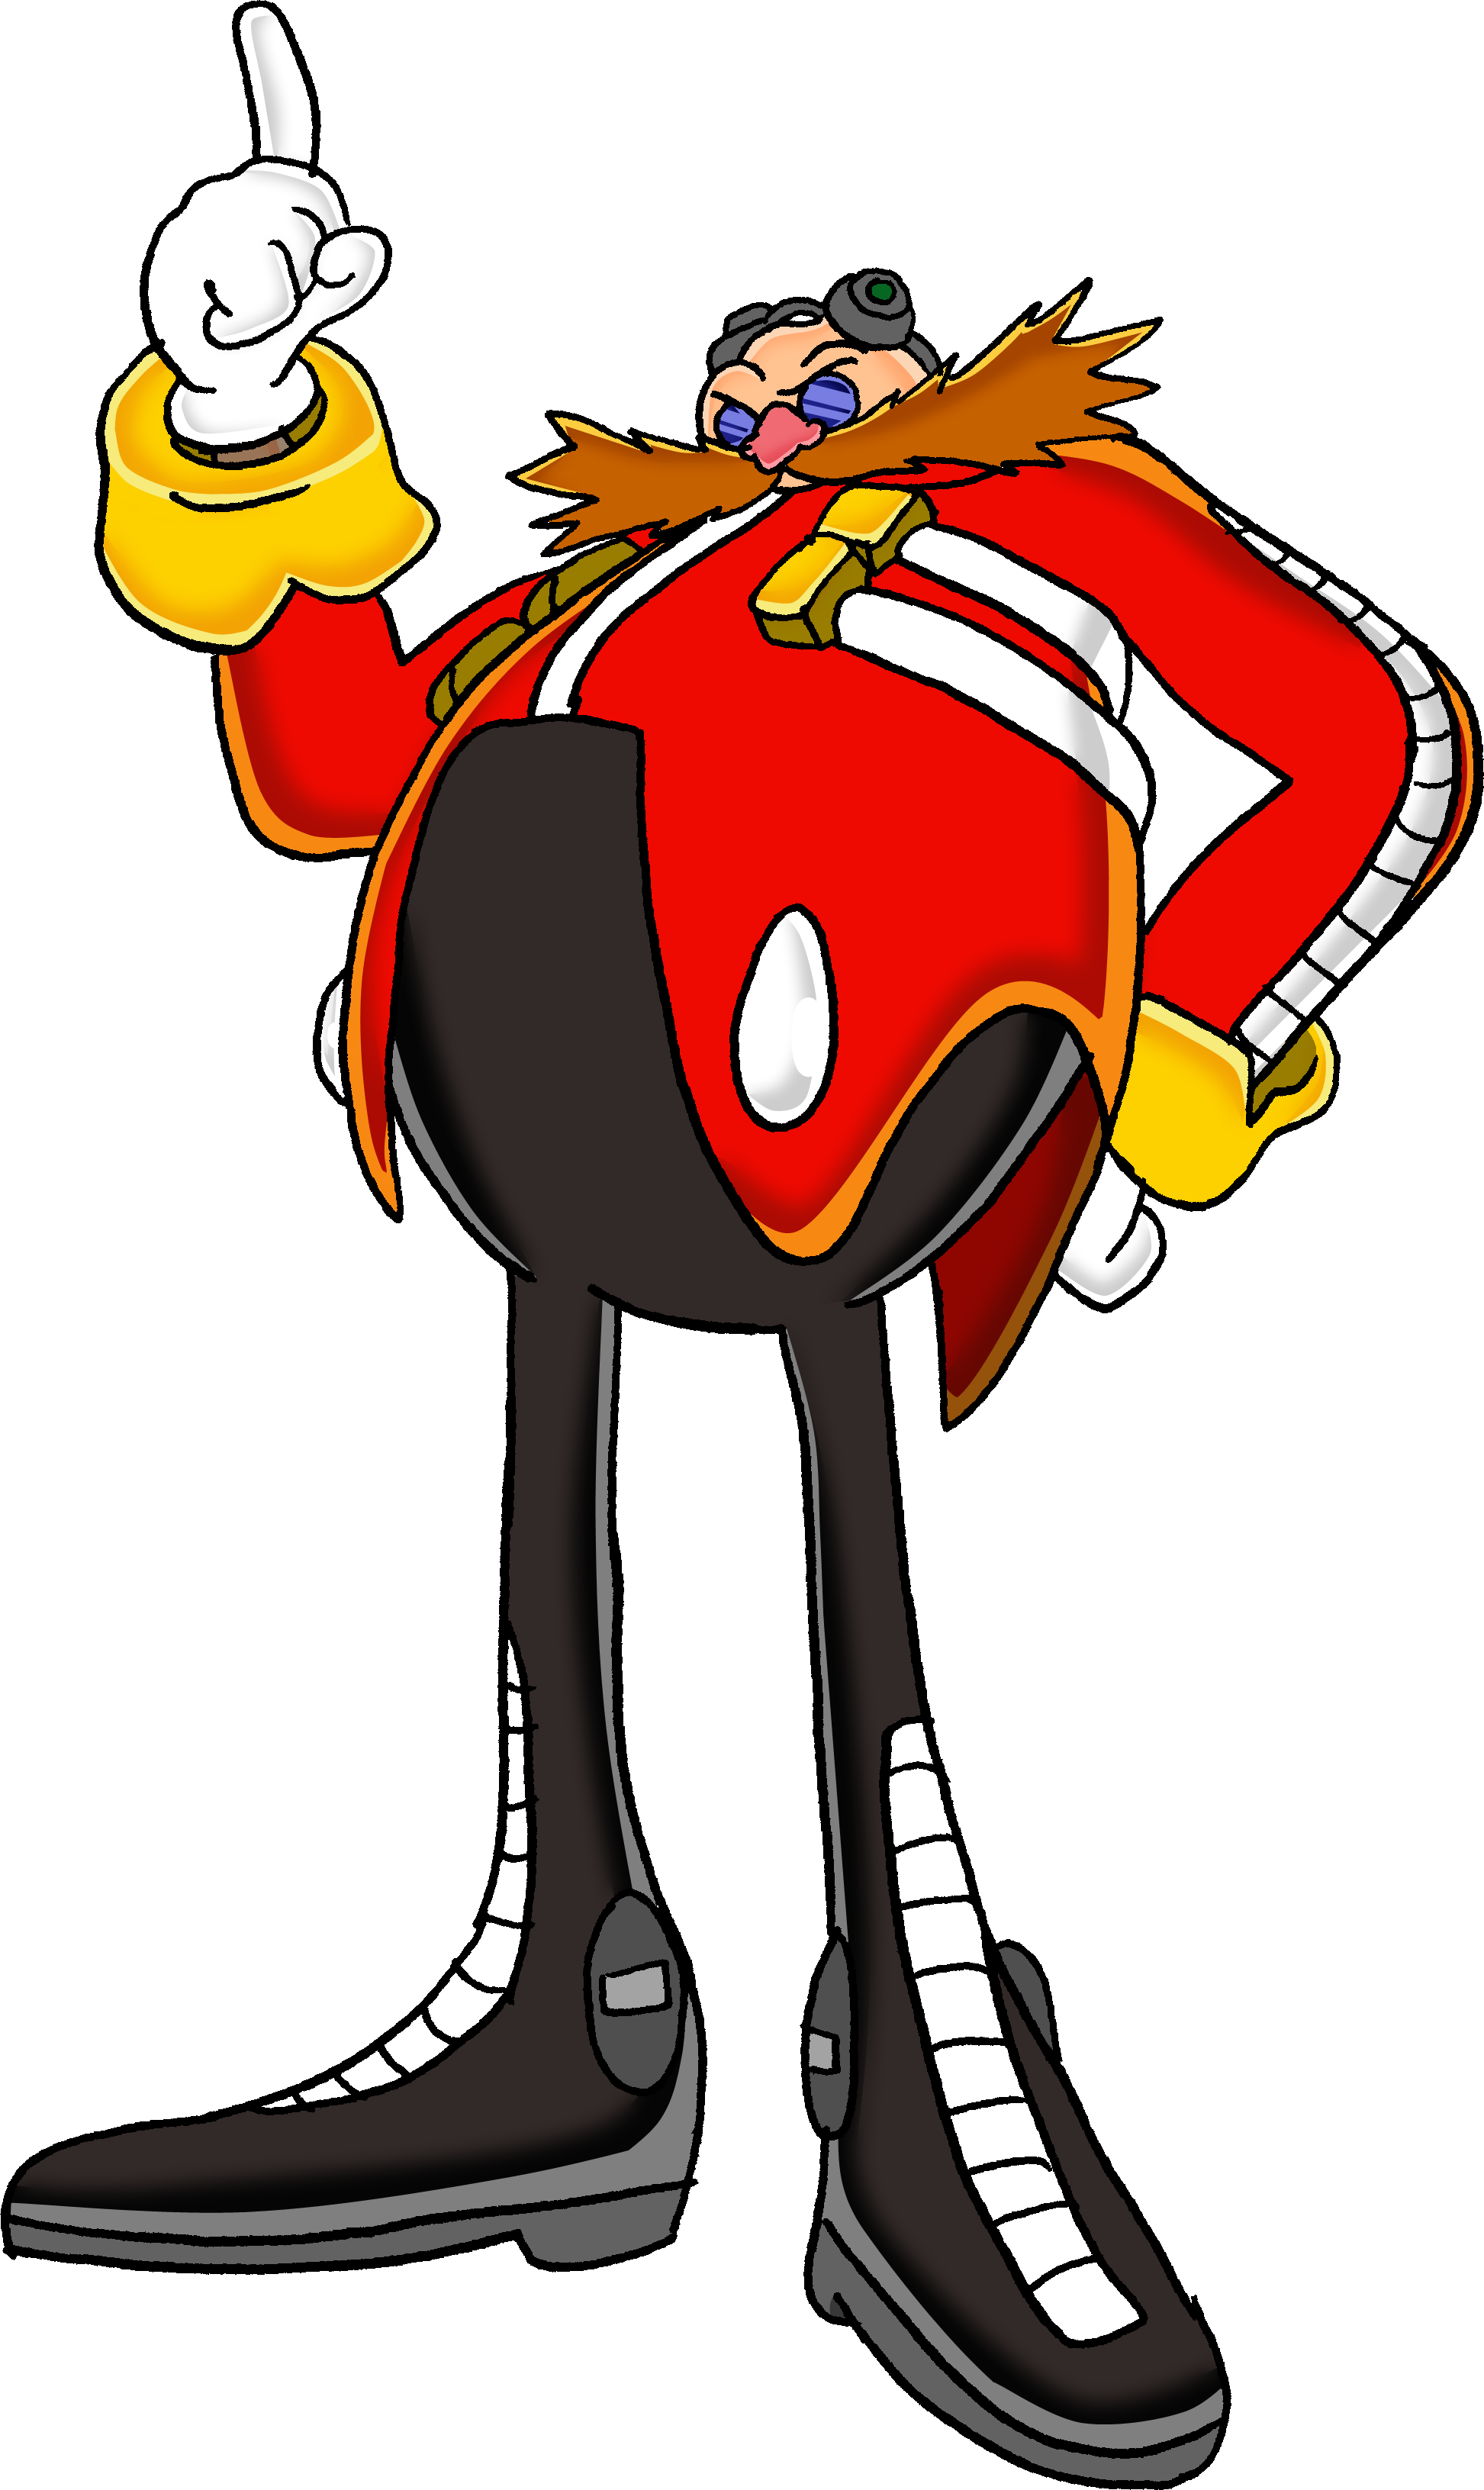 Image Doctor Eggmanpng Sonic News Network Fandom Powered By Wikia 